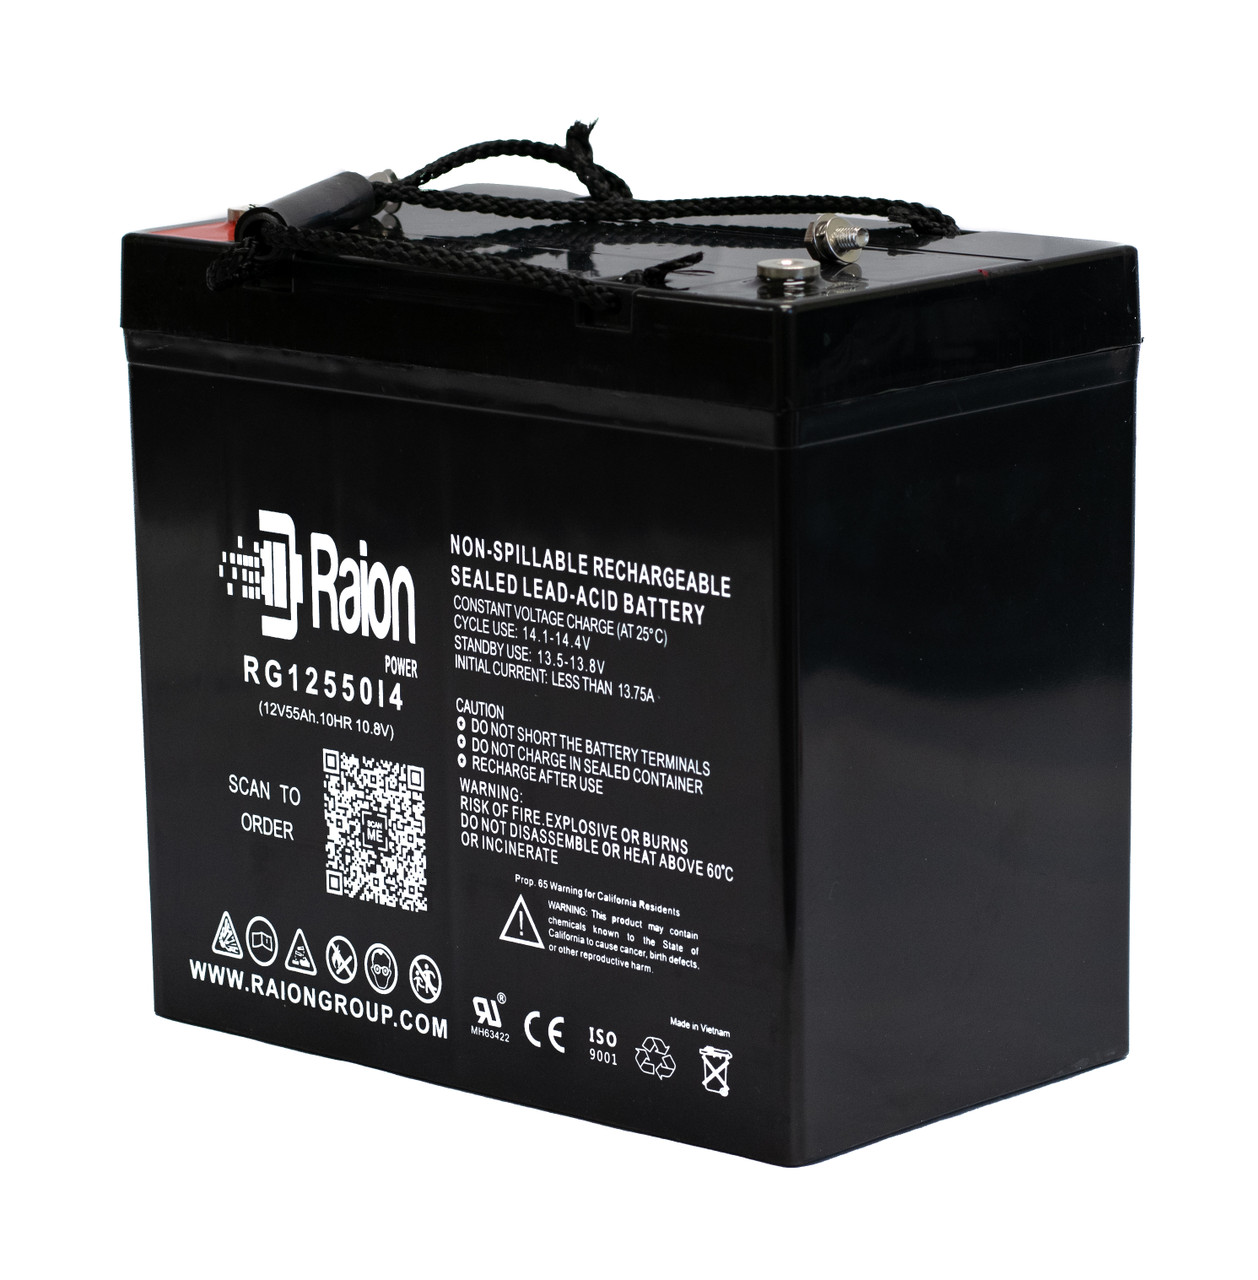 Raion Power Replacement 12V 55Ah Battery for Weida HX12-50A - 1 Pack